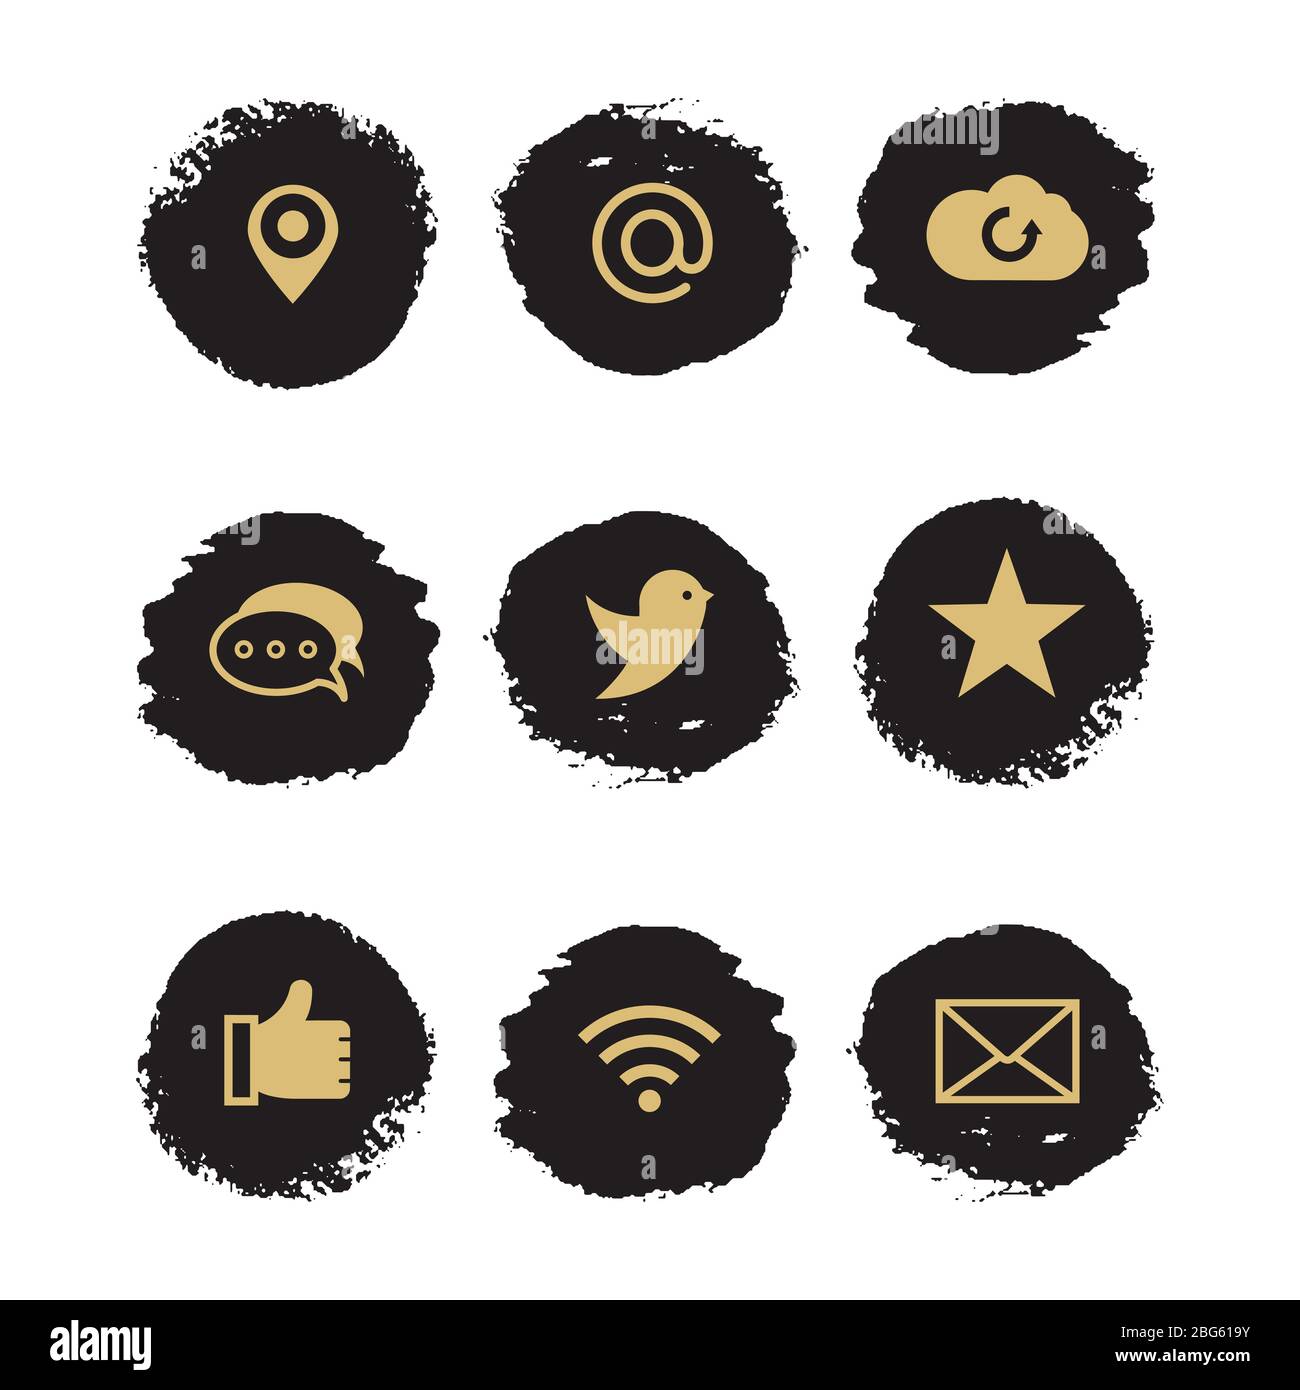 Social media and network grunge icons with black spot. Vector illustration Stock Vector